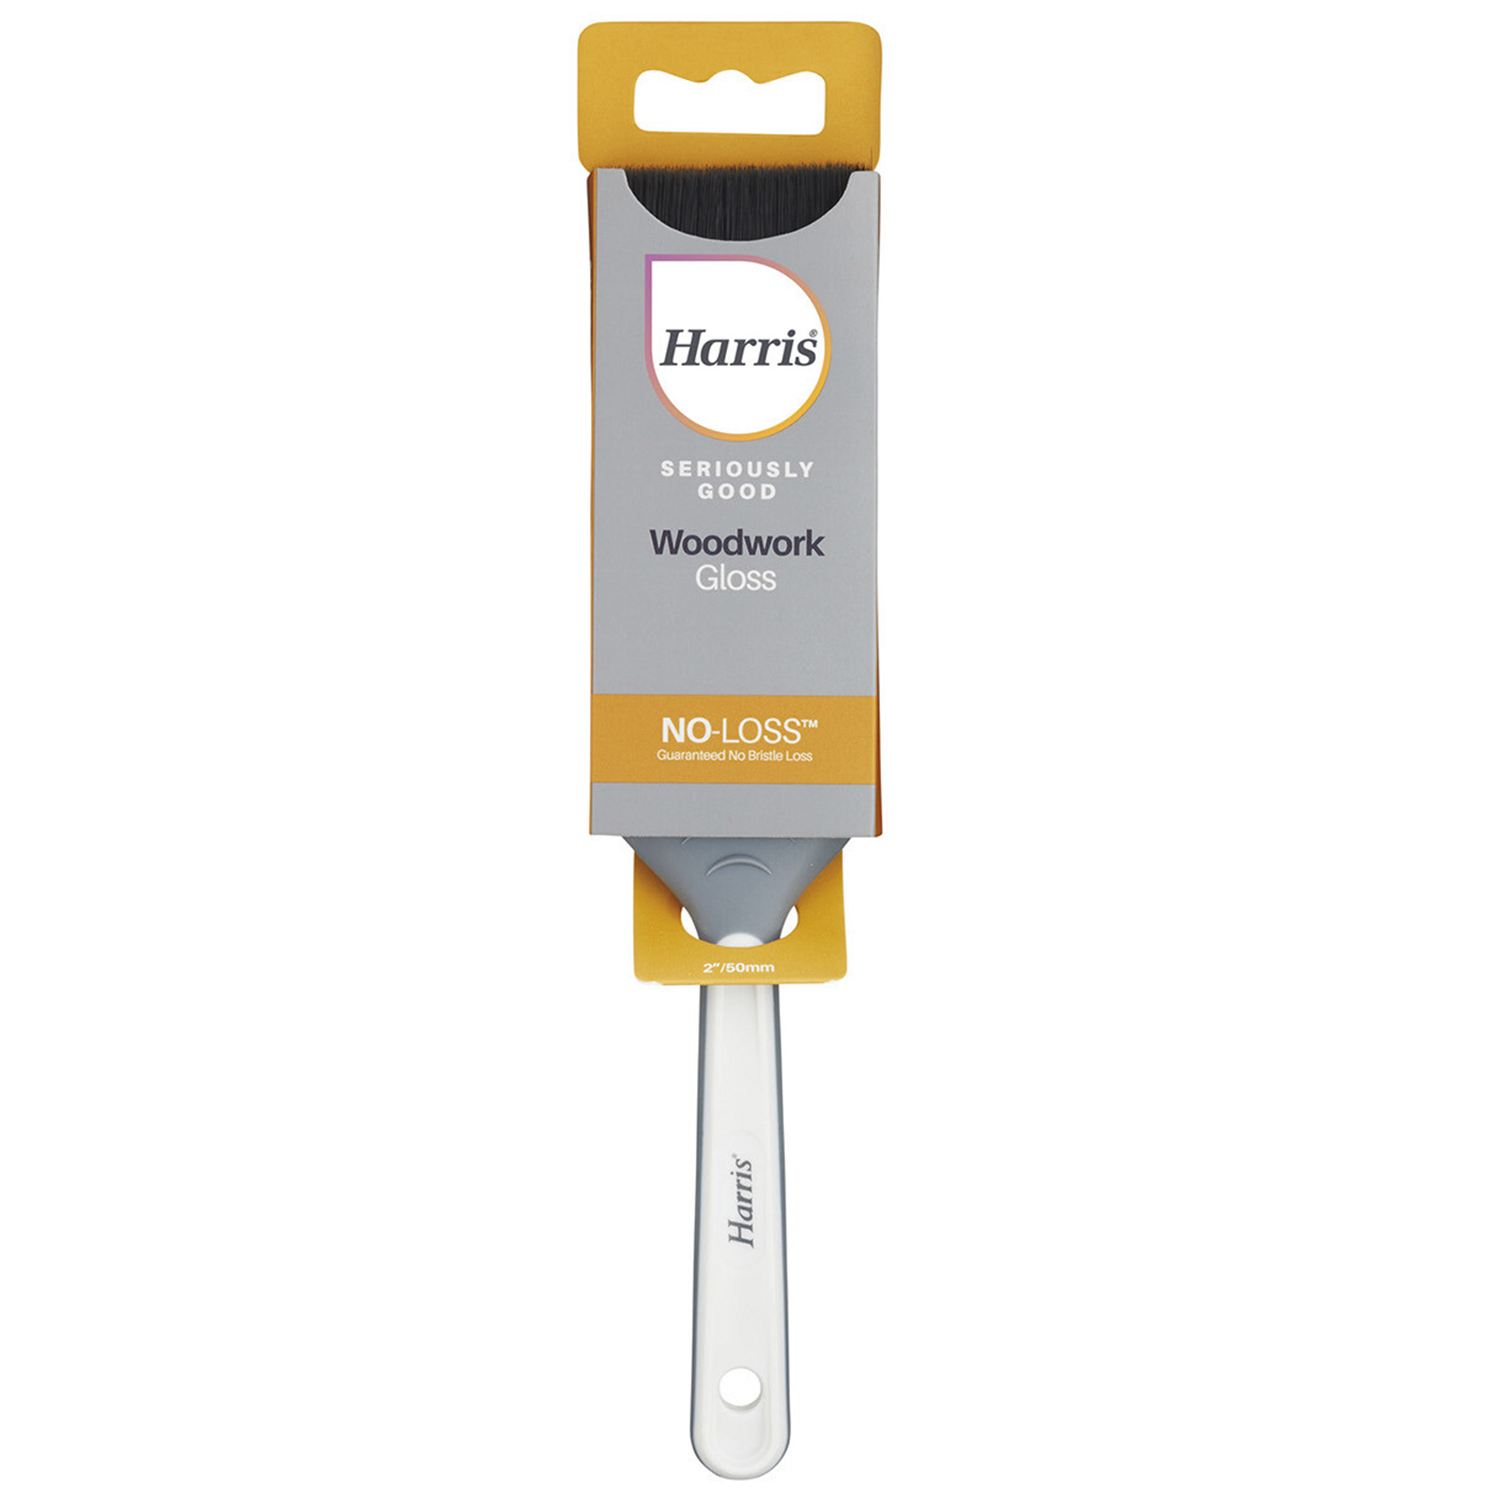 Harris 2 inch Seriously Good Woodwork Gloss Paint Brush Image 1